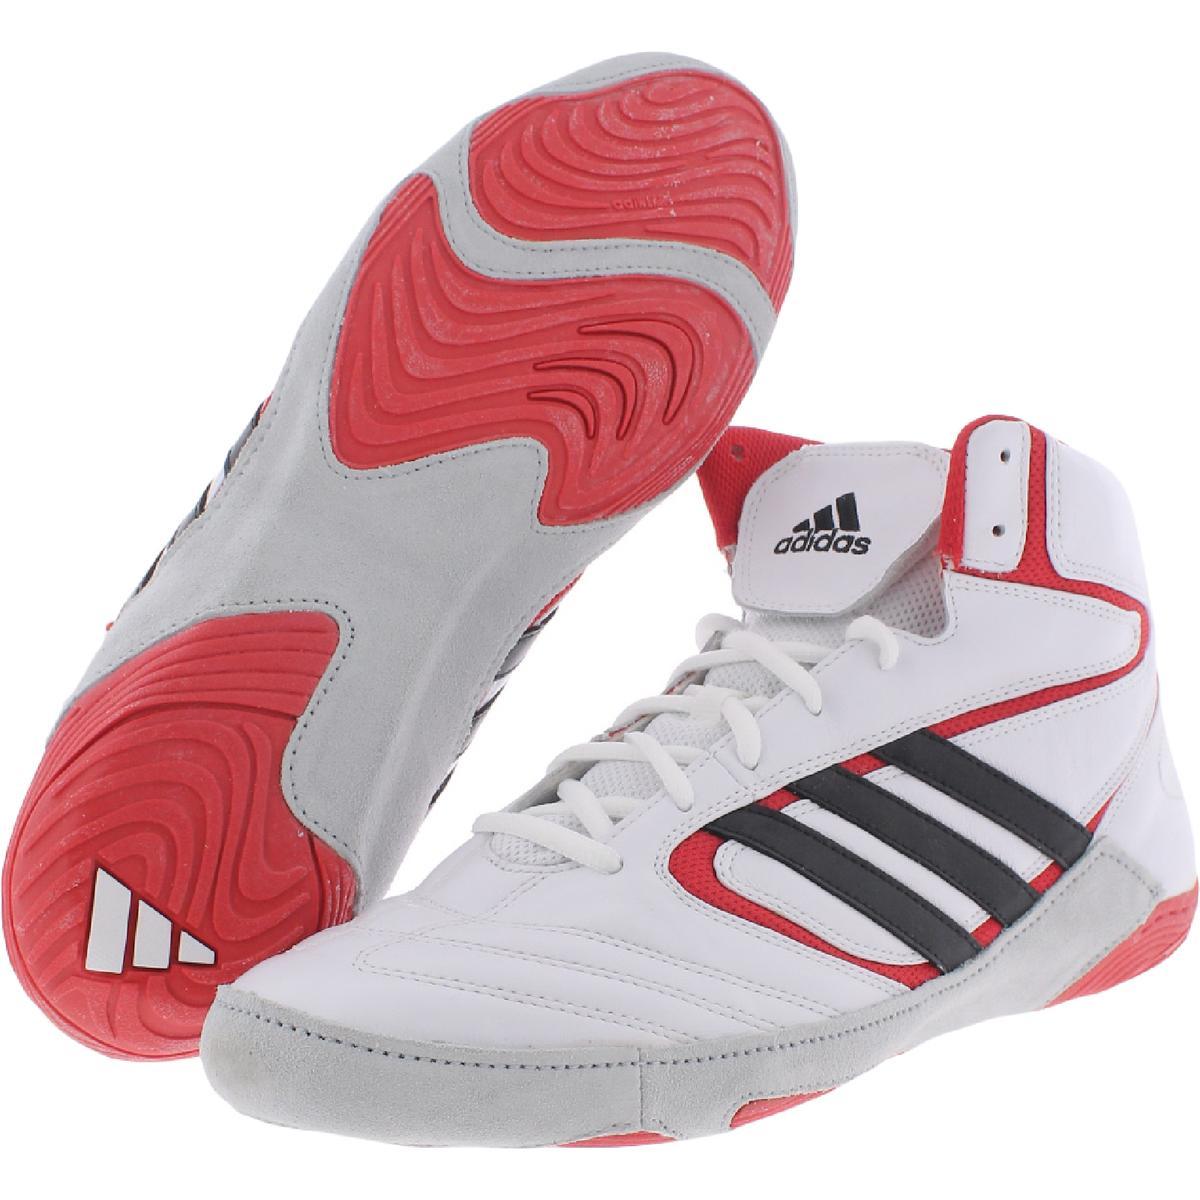 Adidas Shoe Wrestling Mat Wizard 4 Red / White CLEARANCE Sz 4.5